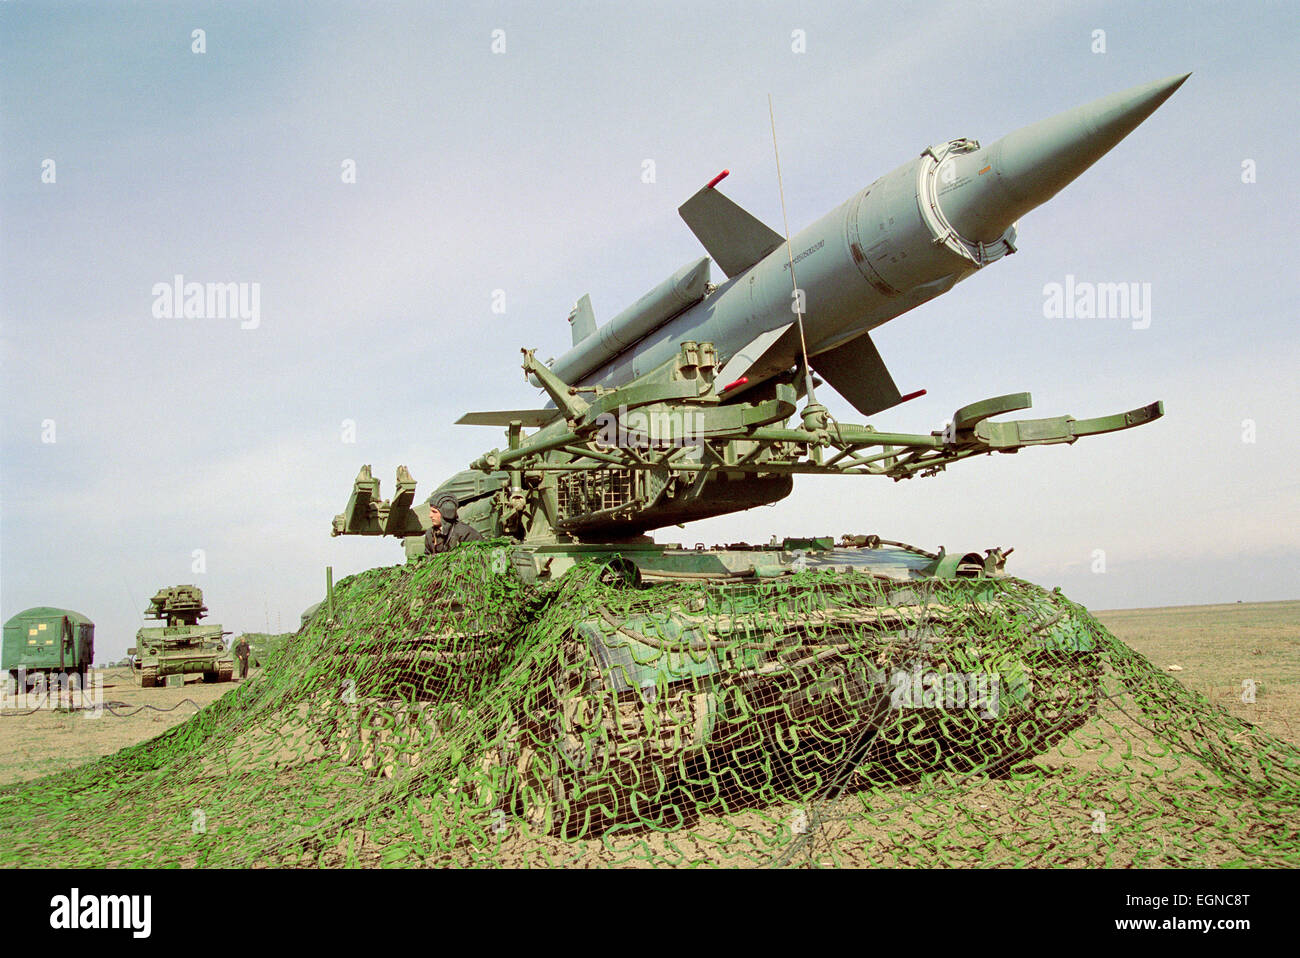 Missile air defense systems Krug Stock Photo